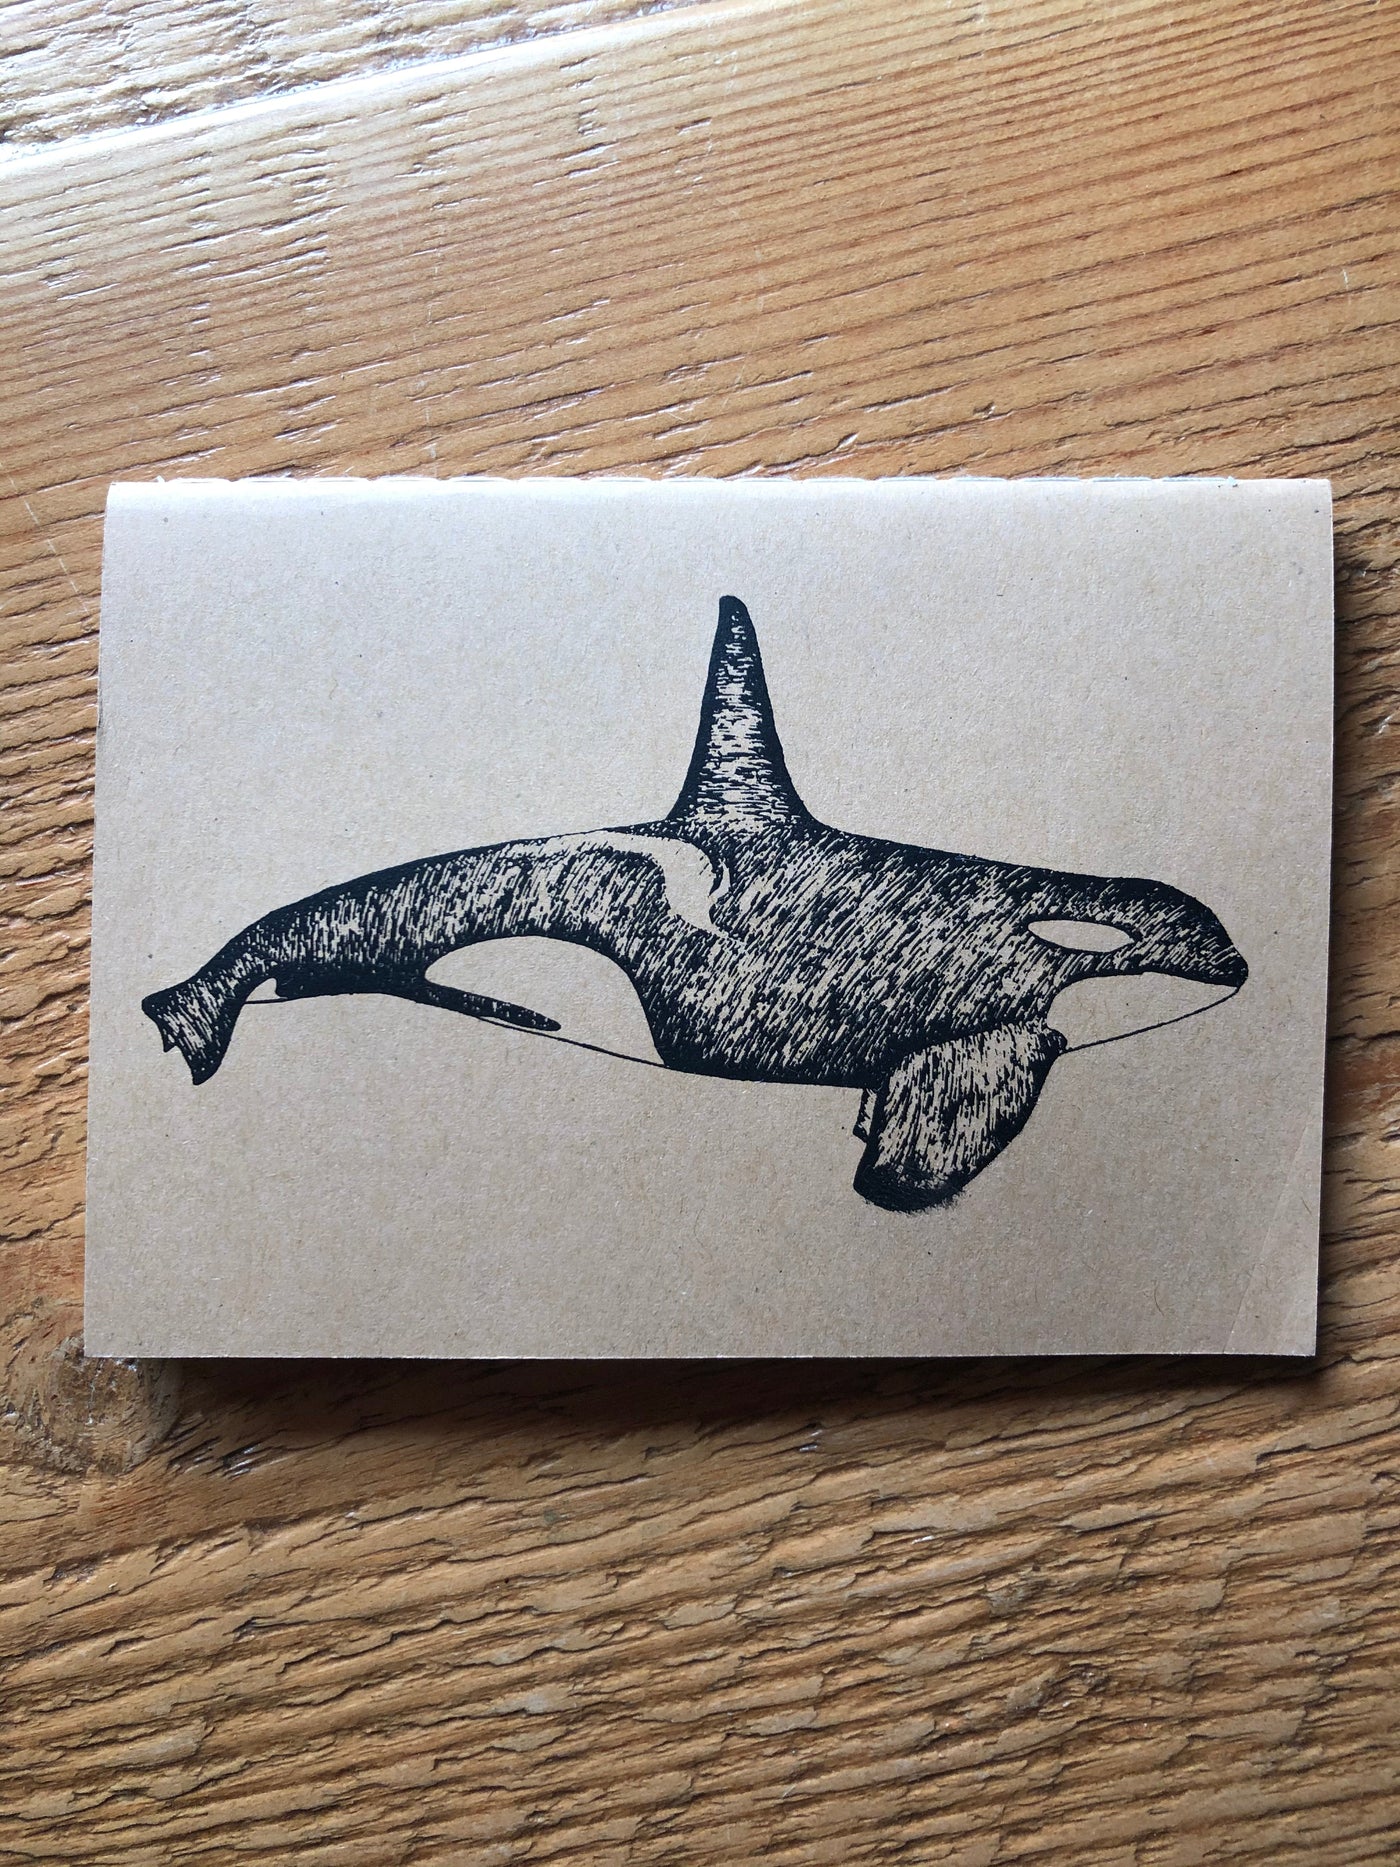 Orca Whale - Small Lined Notebook Notebook Printshop Northwest 